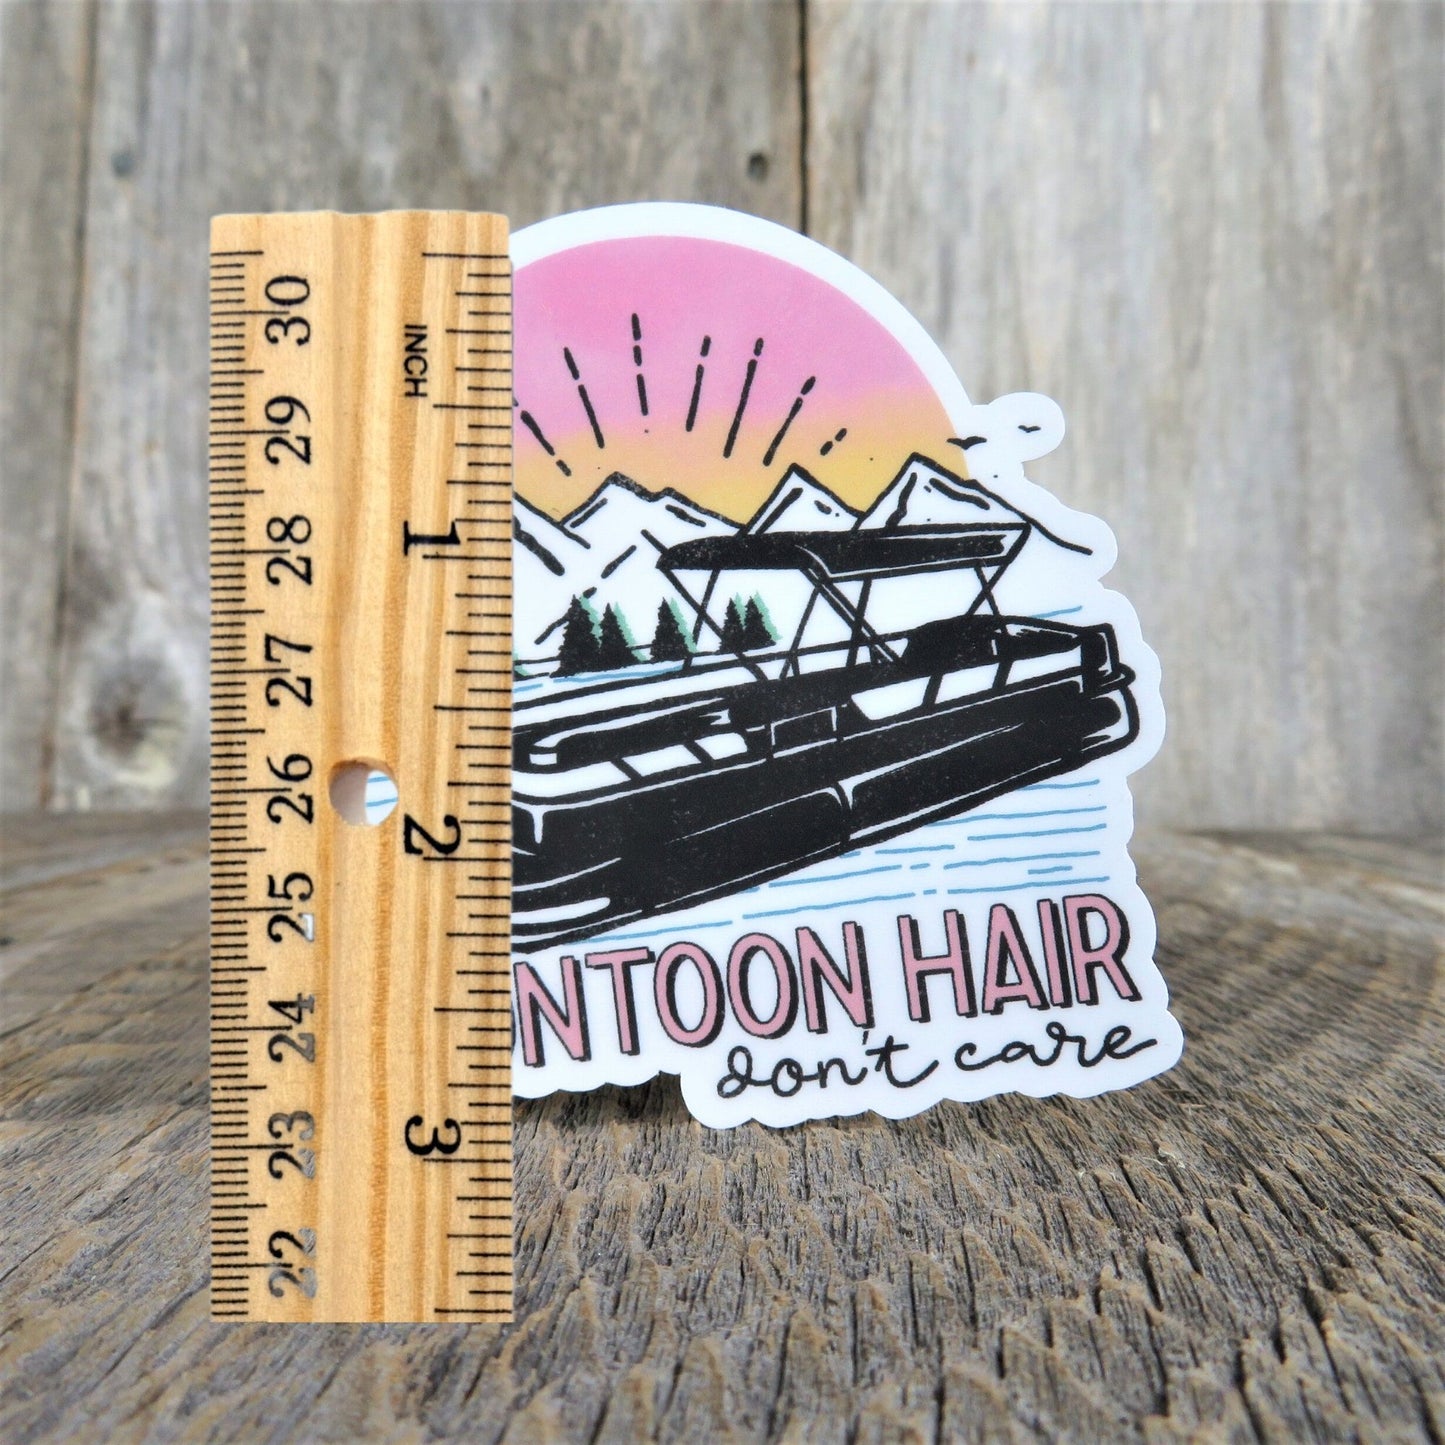 Pontoon Hair Don't Care Sticker Waterproof Lake Lover Sticker Messy Bun Mountains Woods Camping Outdoors Retro Colors